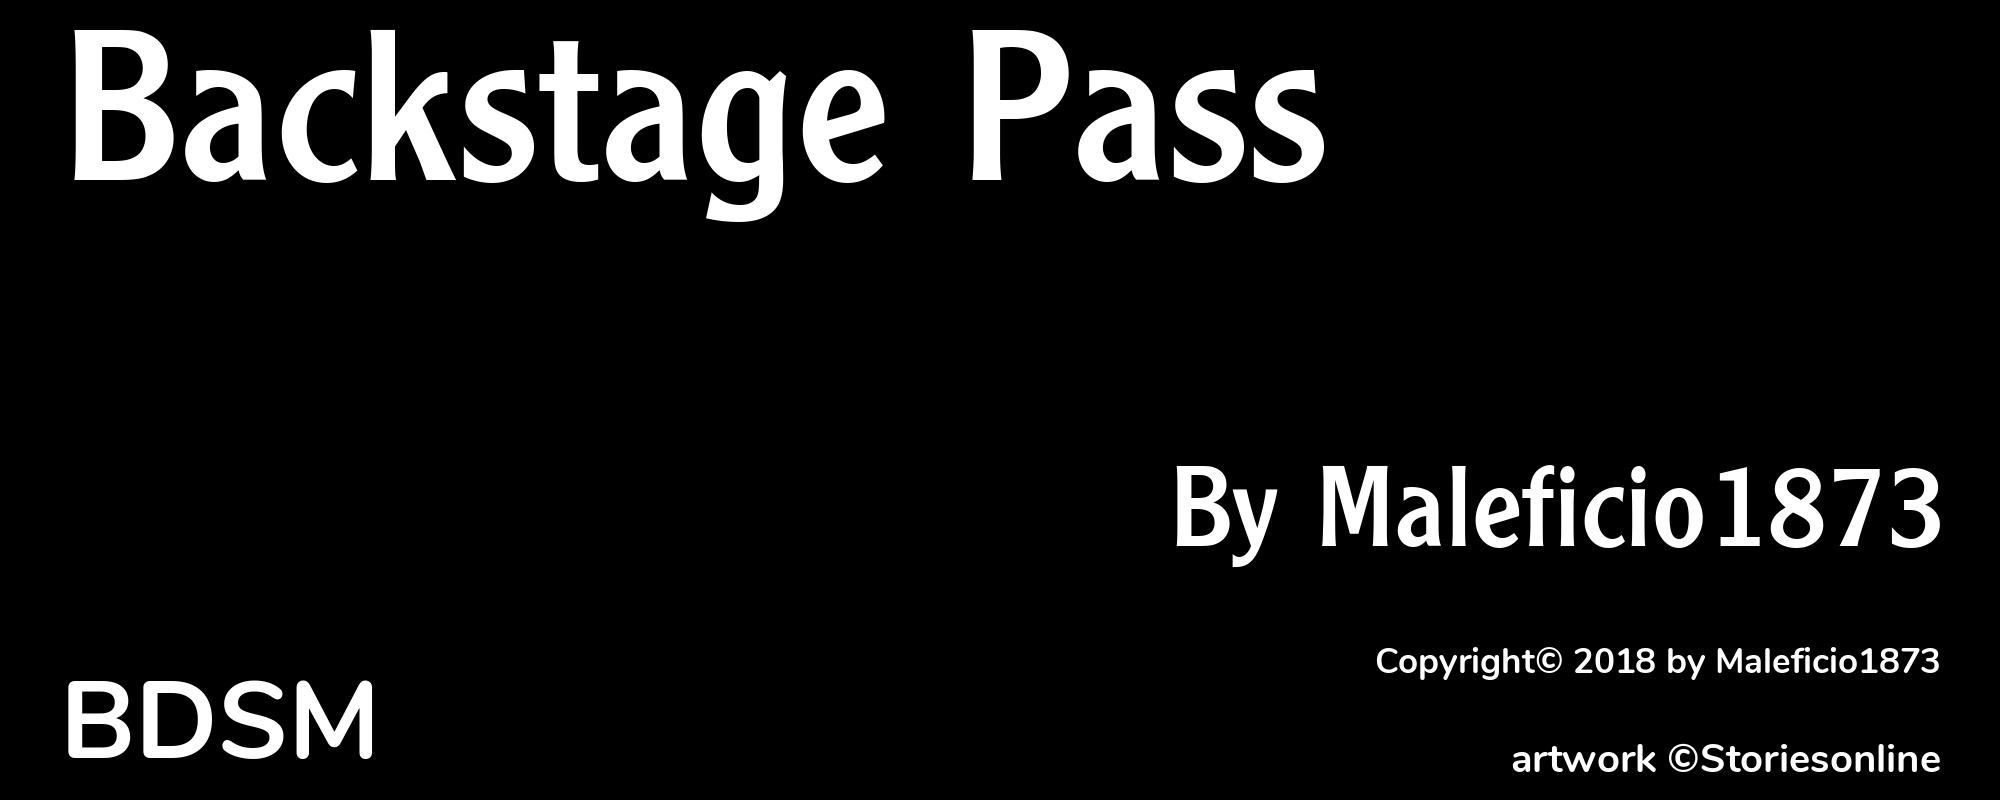 Backstage Pass - Cover